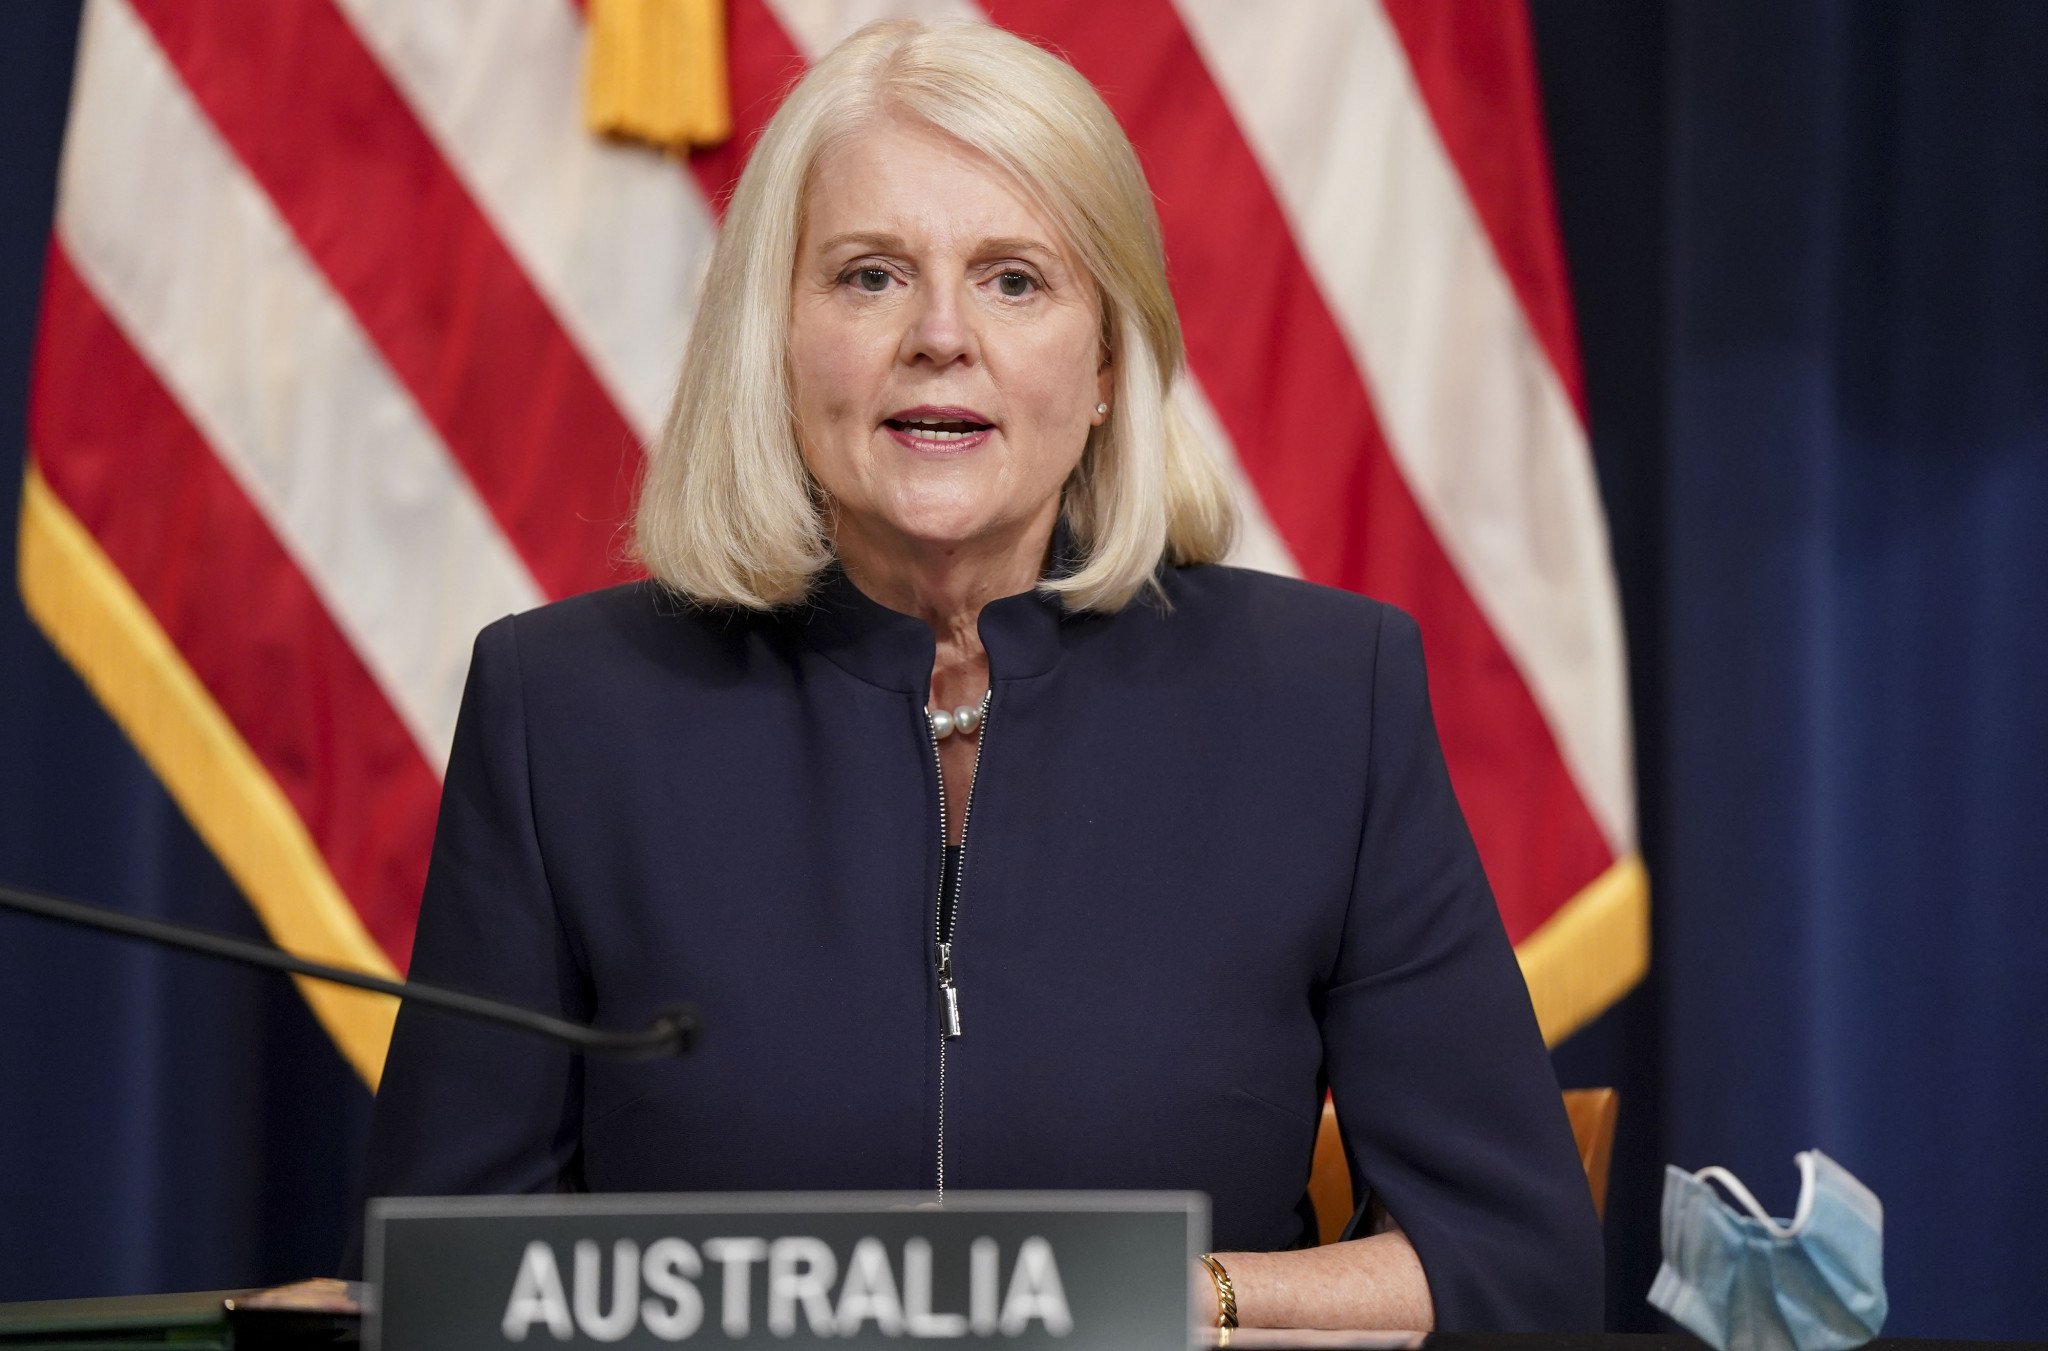 Australia’s Home Affairs Minister Karen Andrews said any unvaccinated visitors to the country must provide proof they cannot be inoculated for medical reasons ©Getty Images